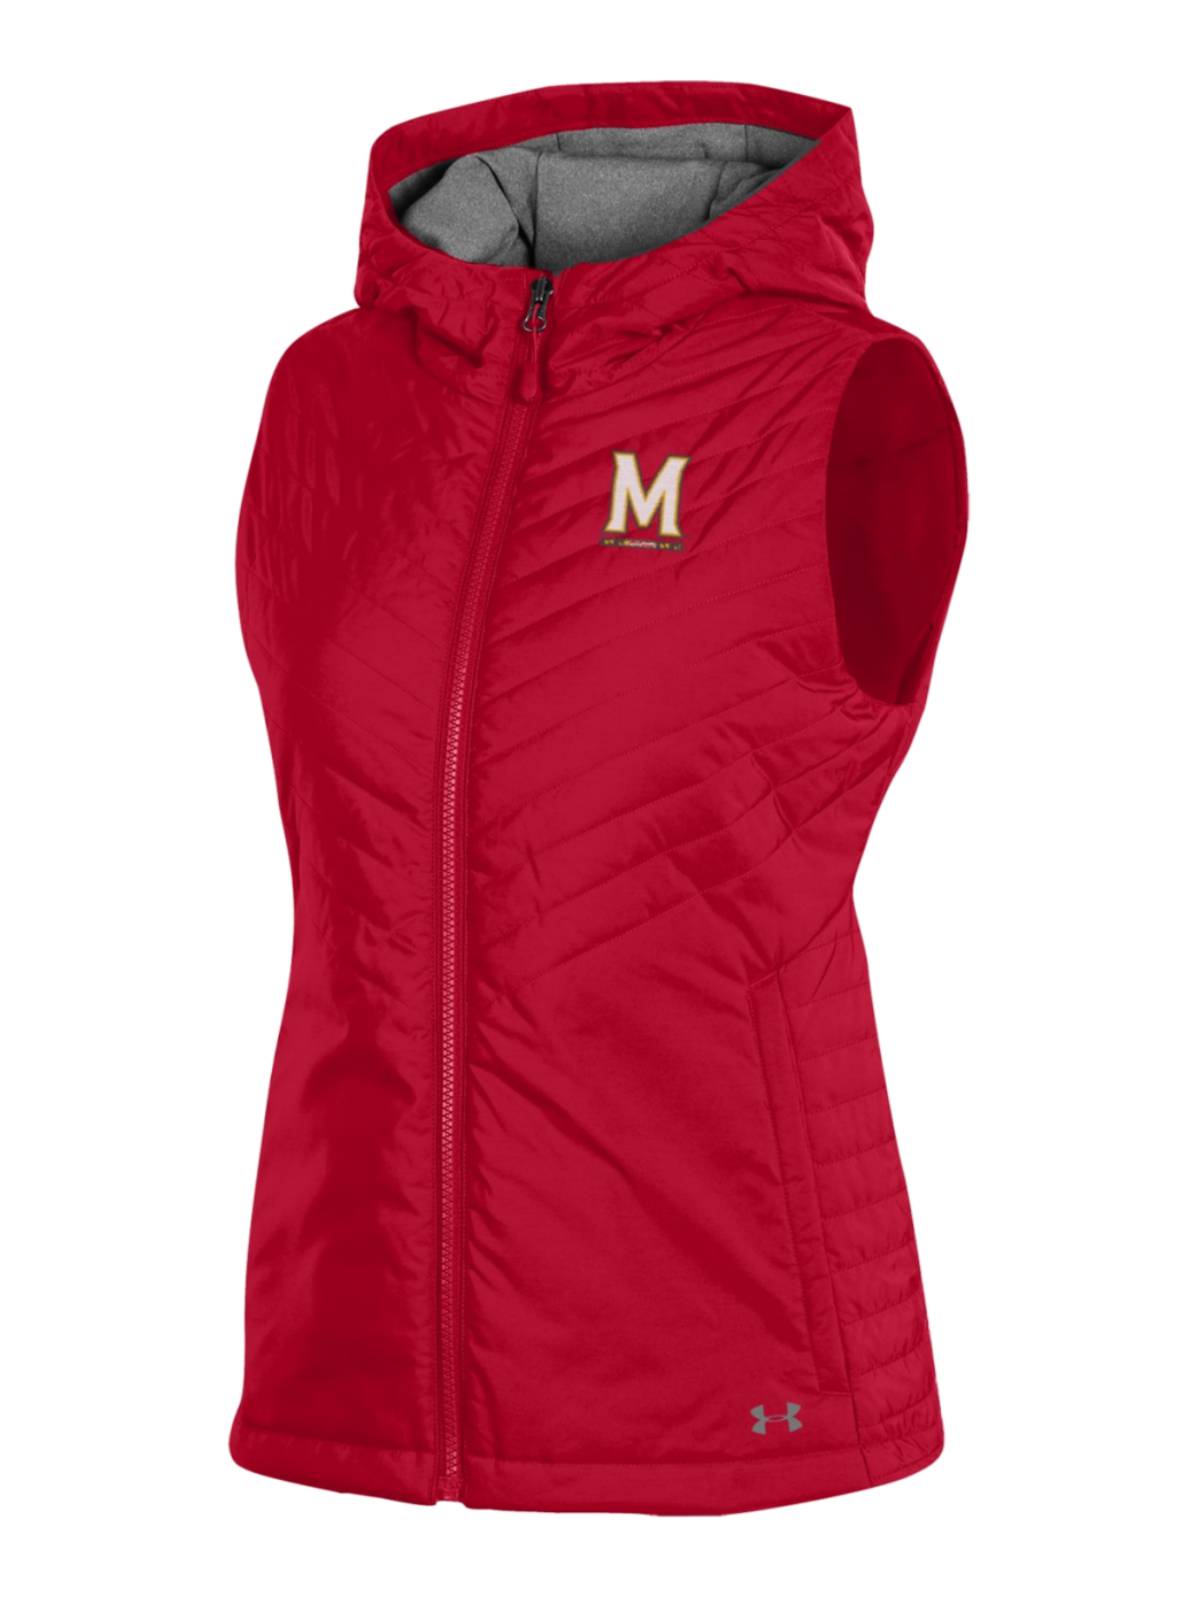 Under Armour Maryland Terrapins  WOMEN'S Red Storm Fitted Hooded Puffer Vest